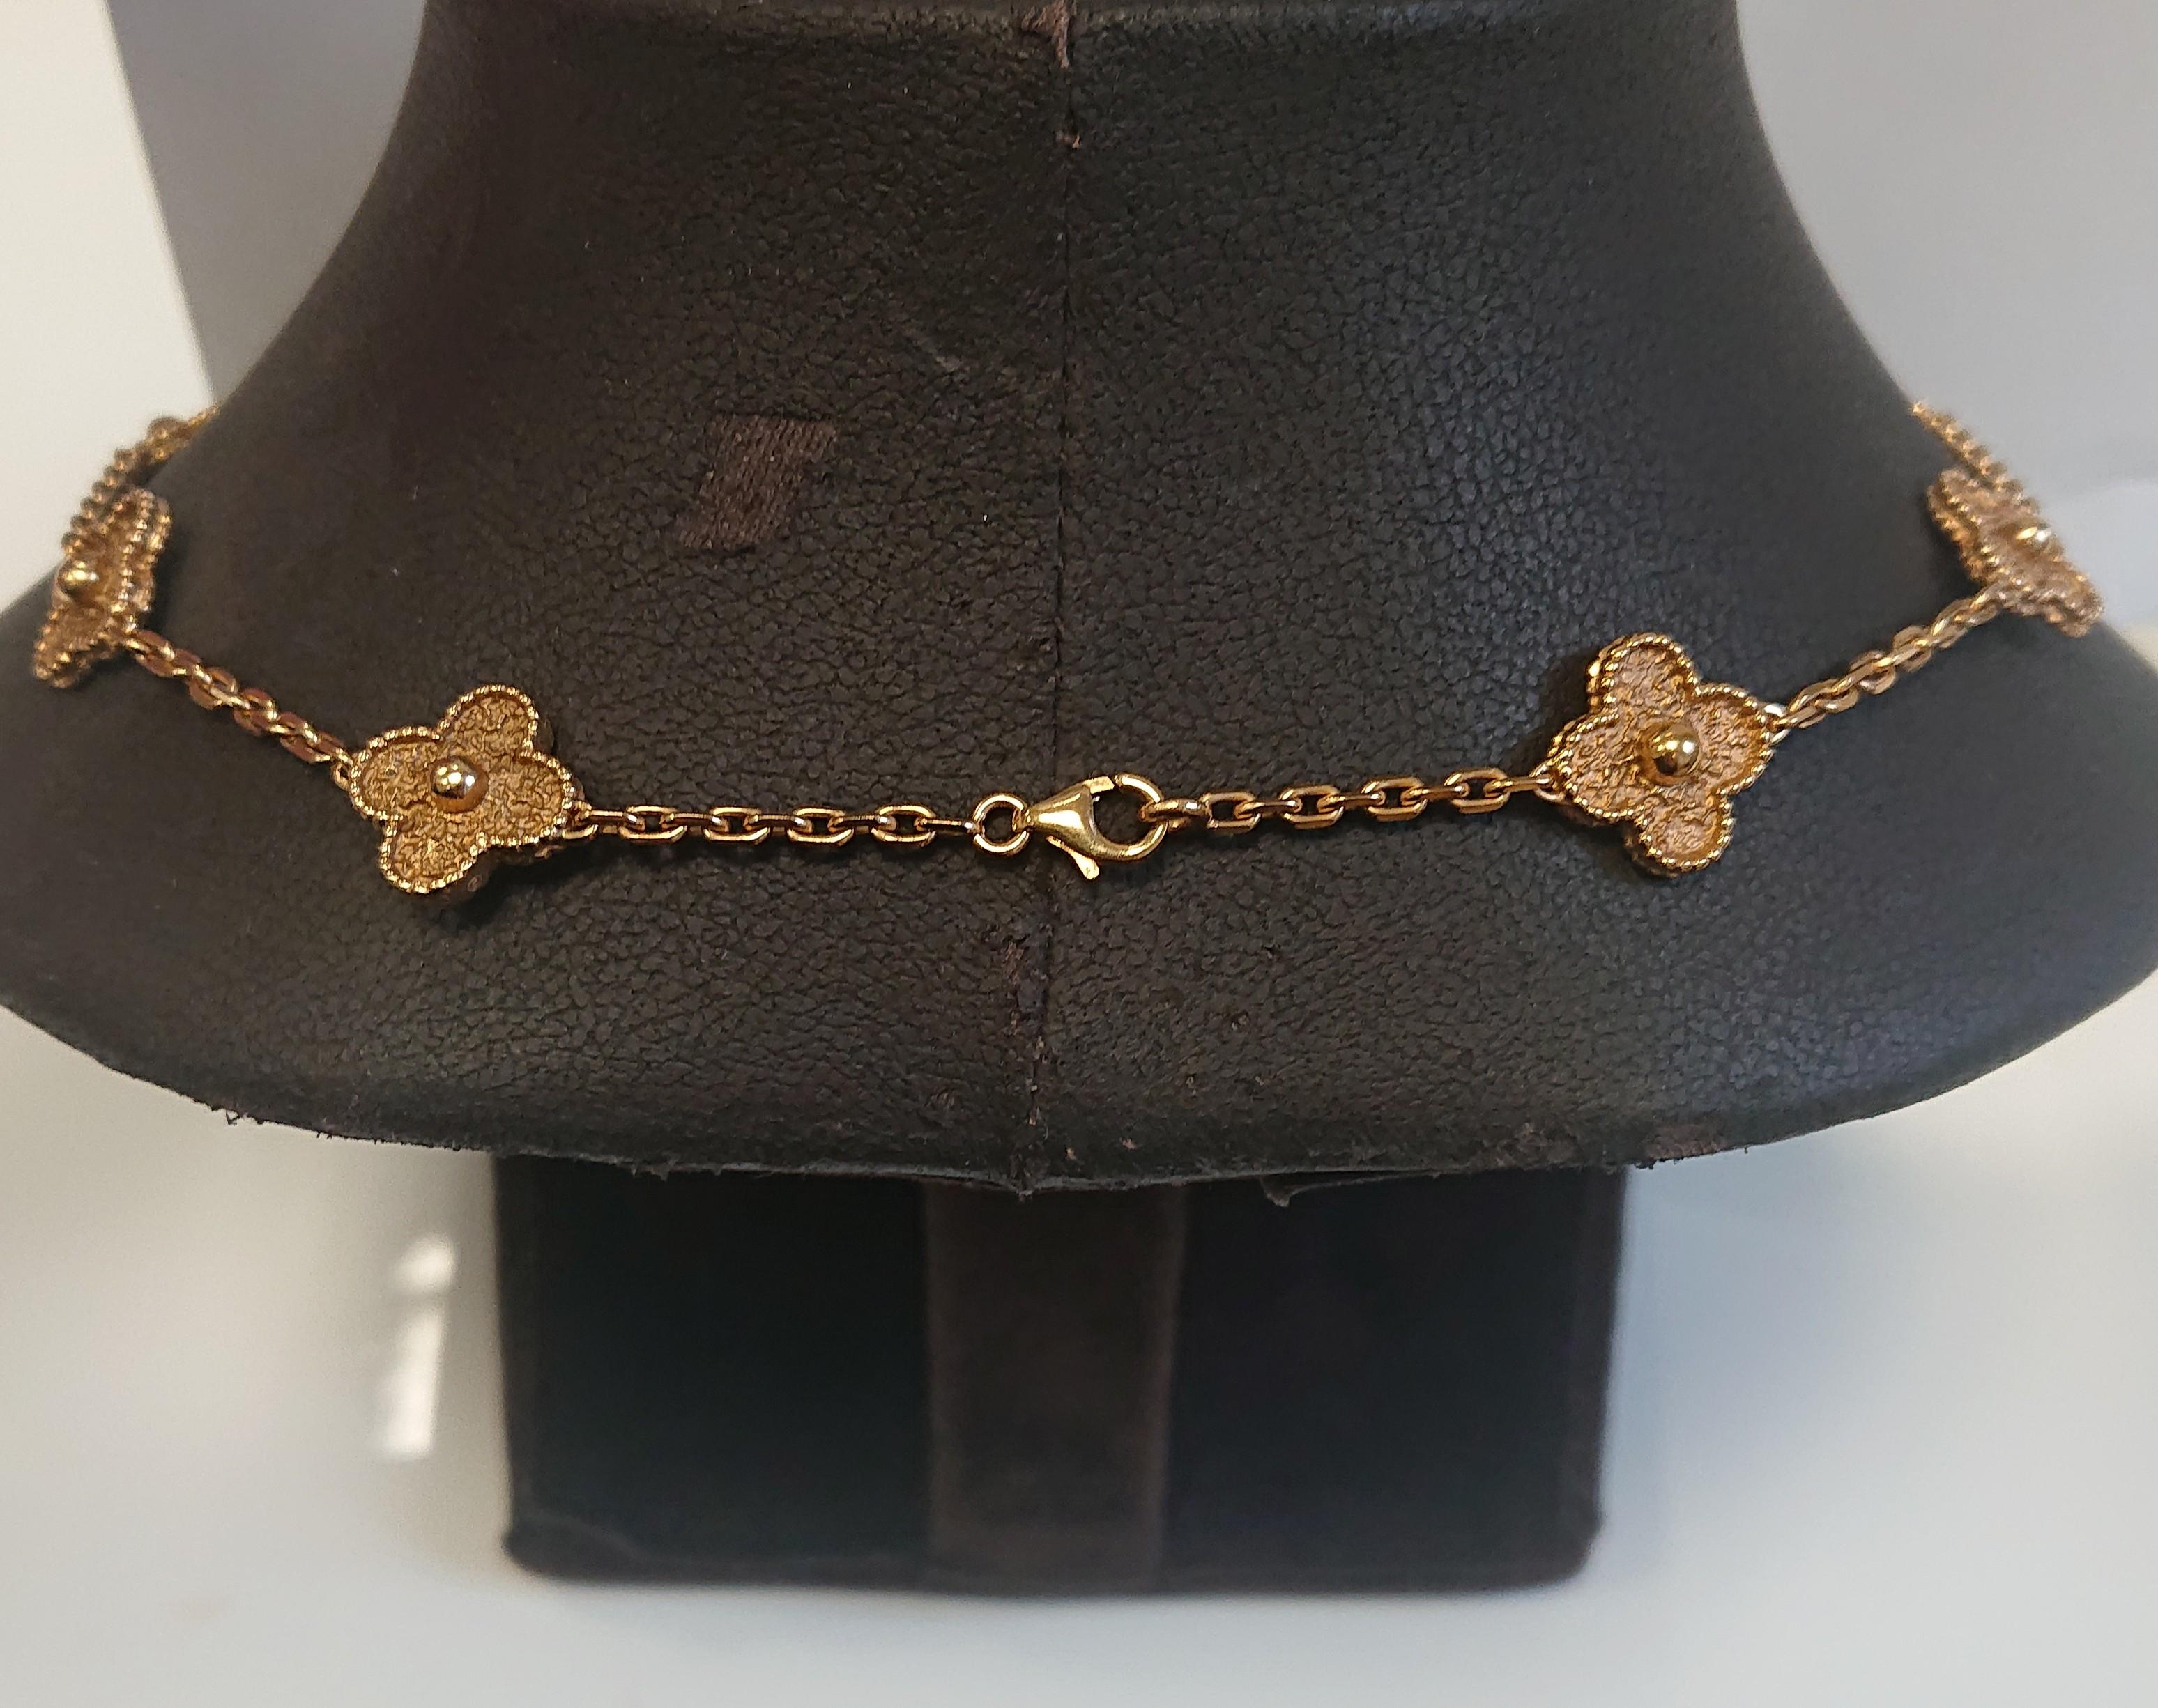 A Van Cleef & Arpels 10 Motif Alhambra Rose Gold Chain Necklace. Set in 18ct rose gold with 10 textured motifs. Signed 